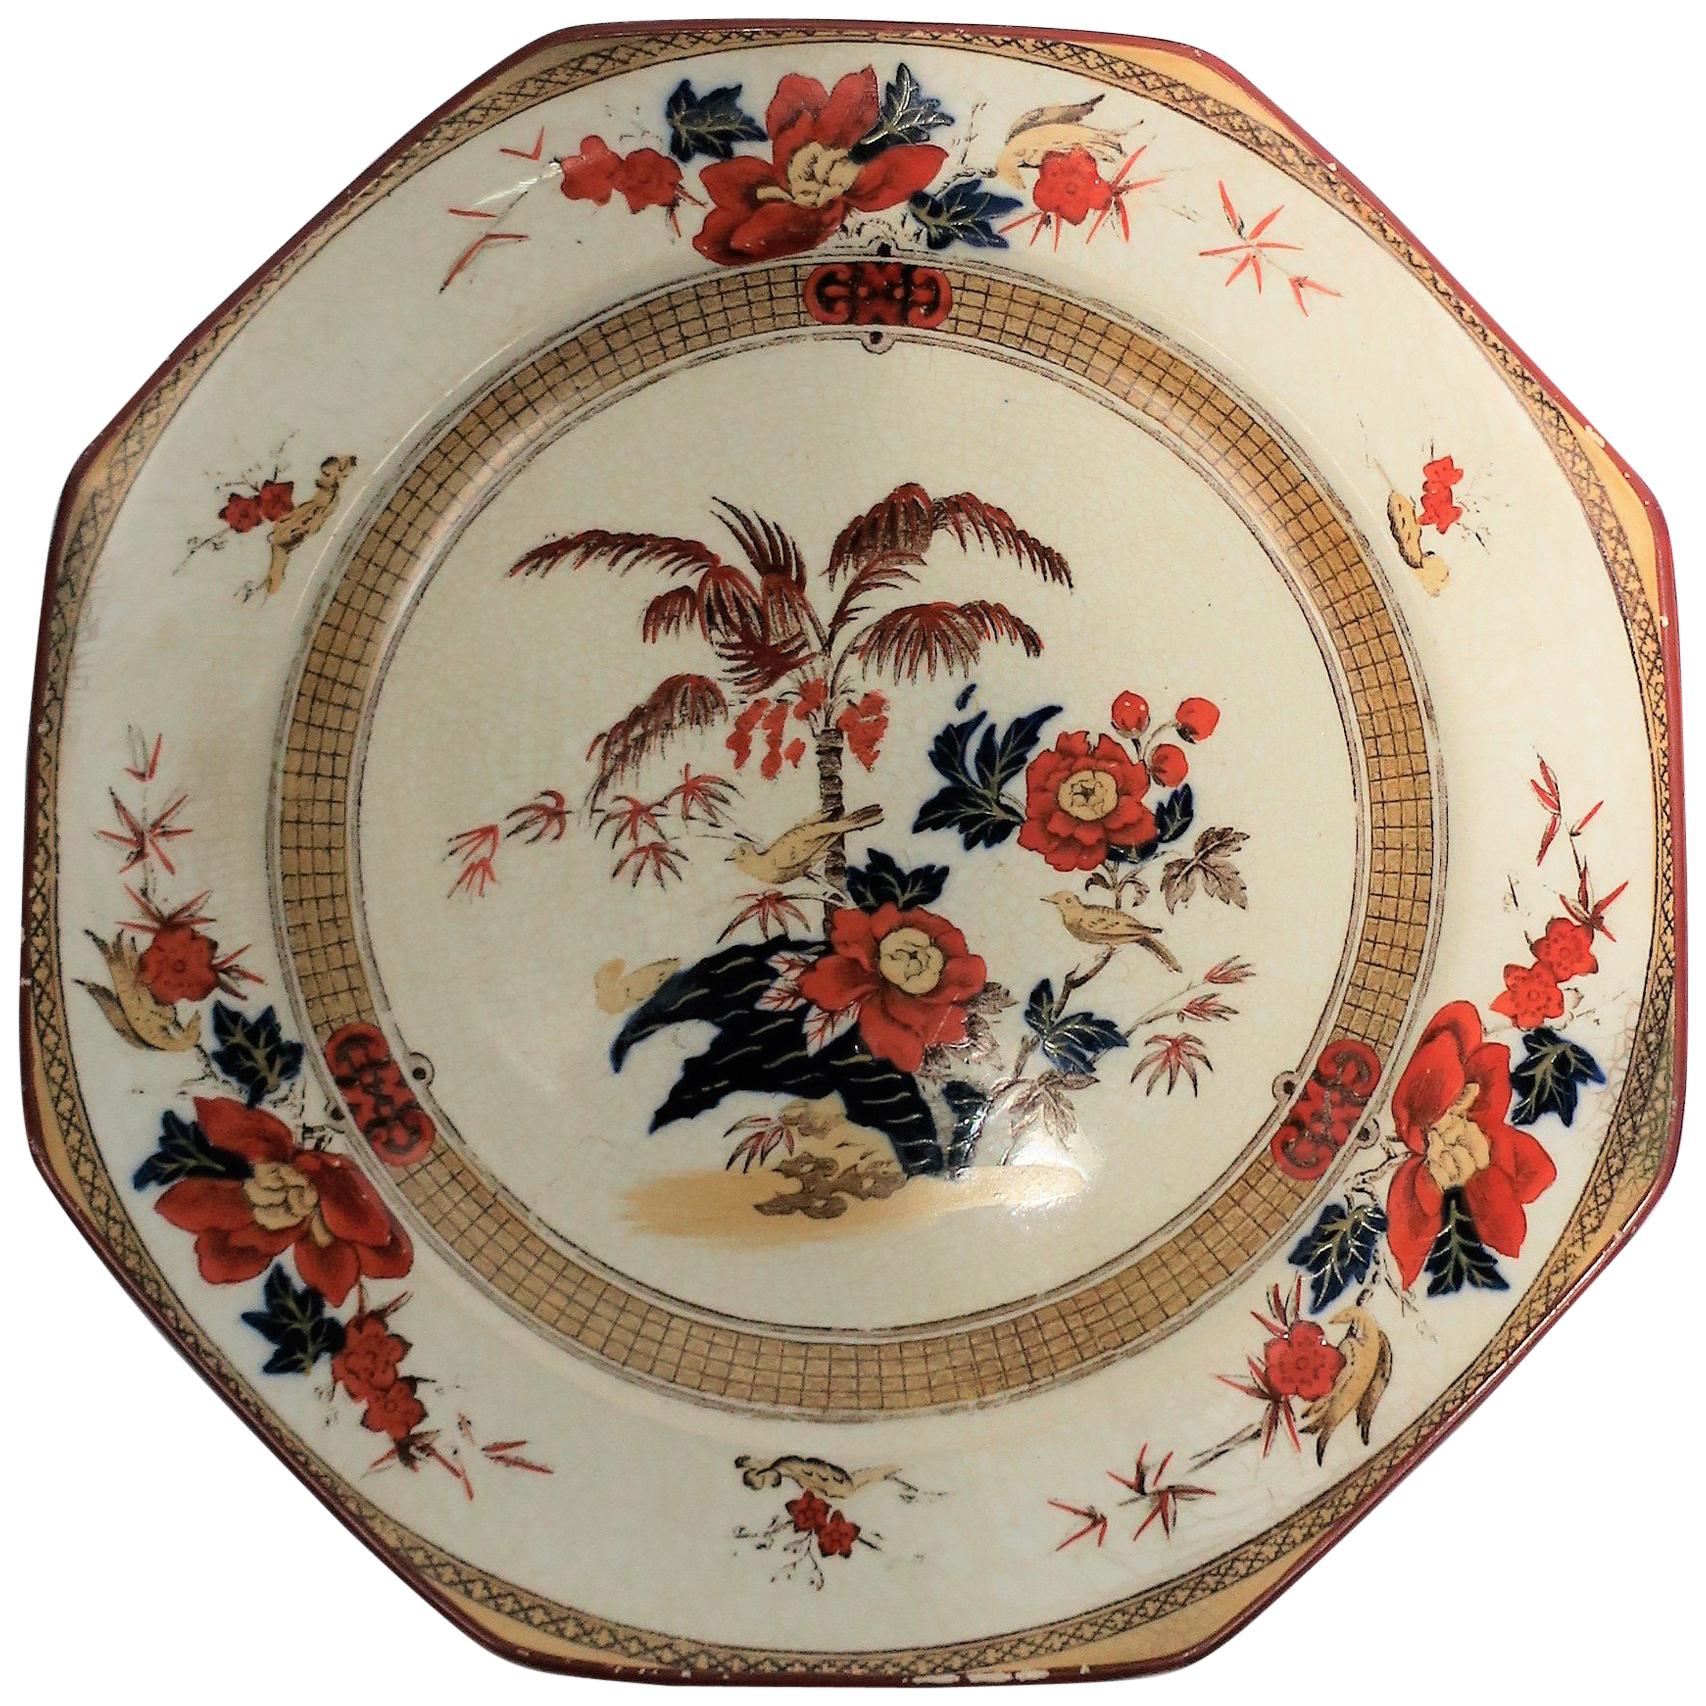 Antique English Octagonal Plate with Bird and Palm Tree Design by Wedgwood